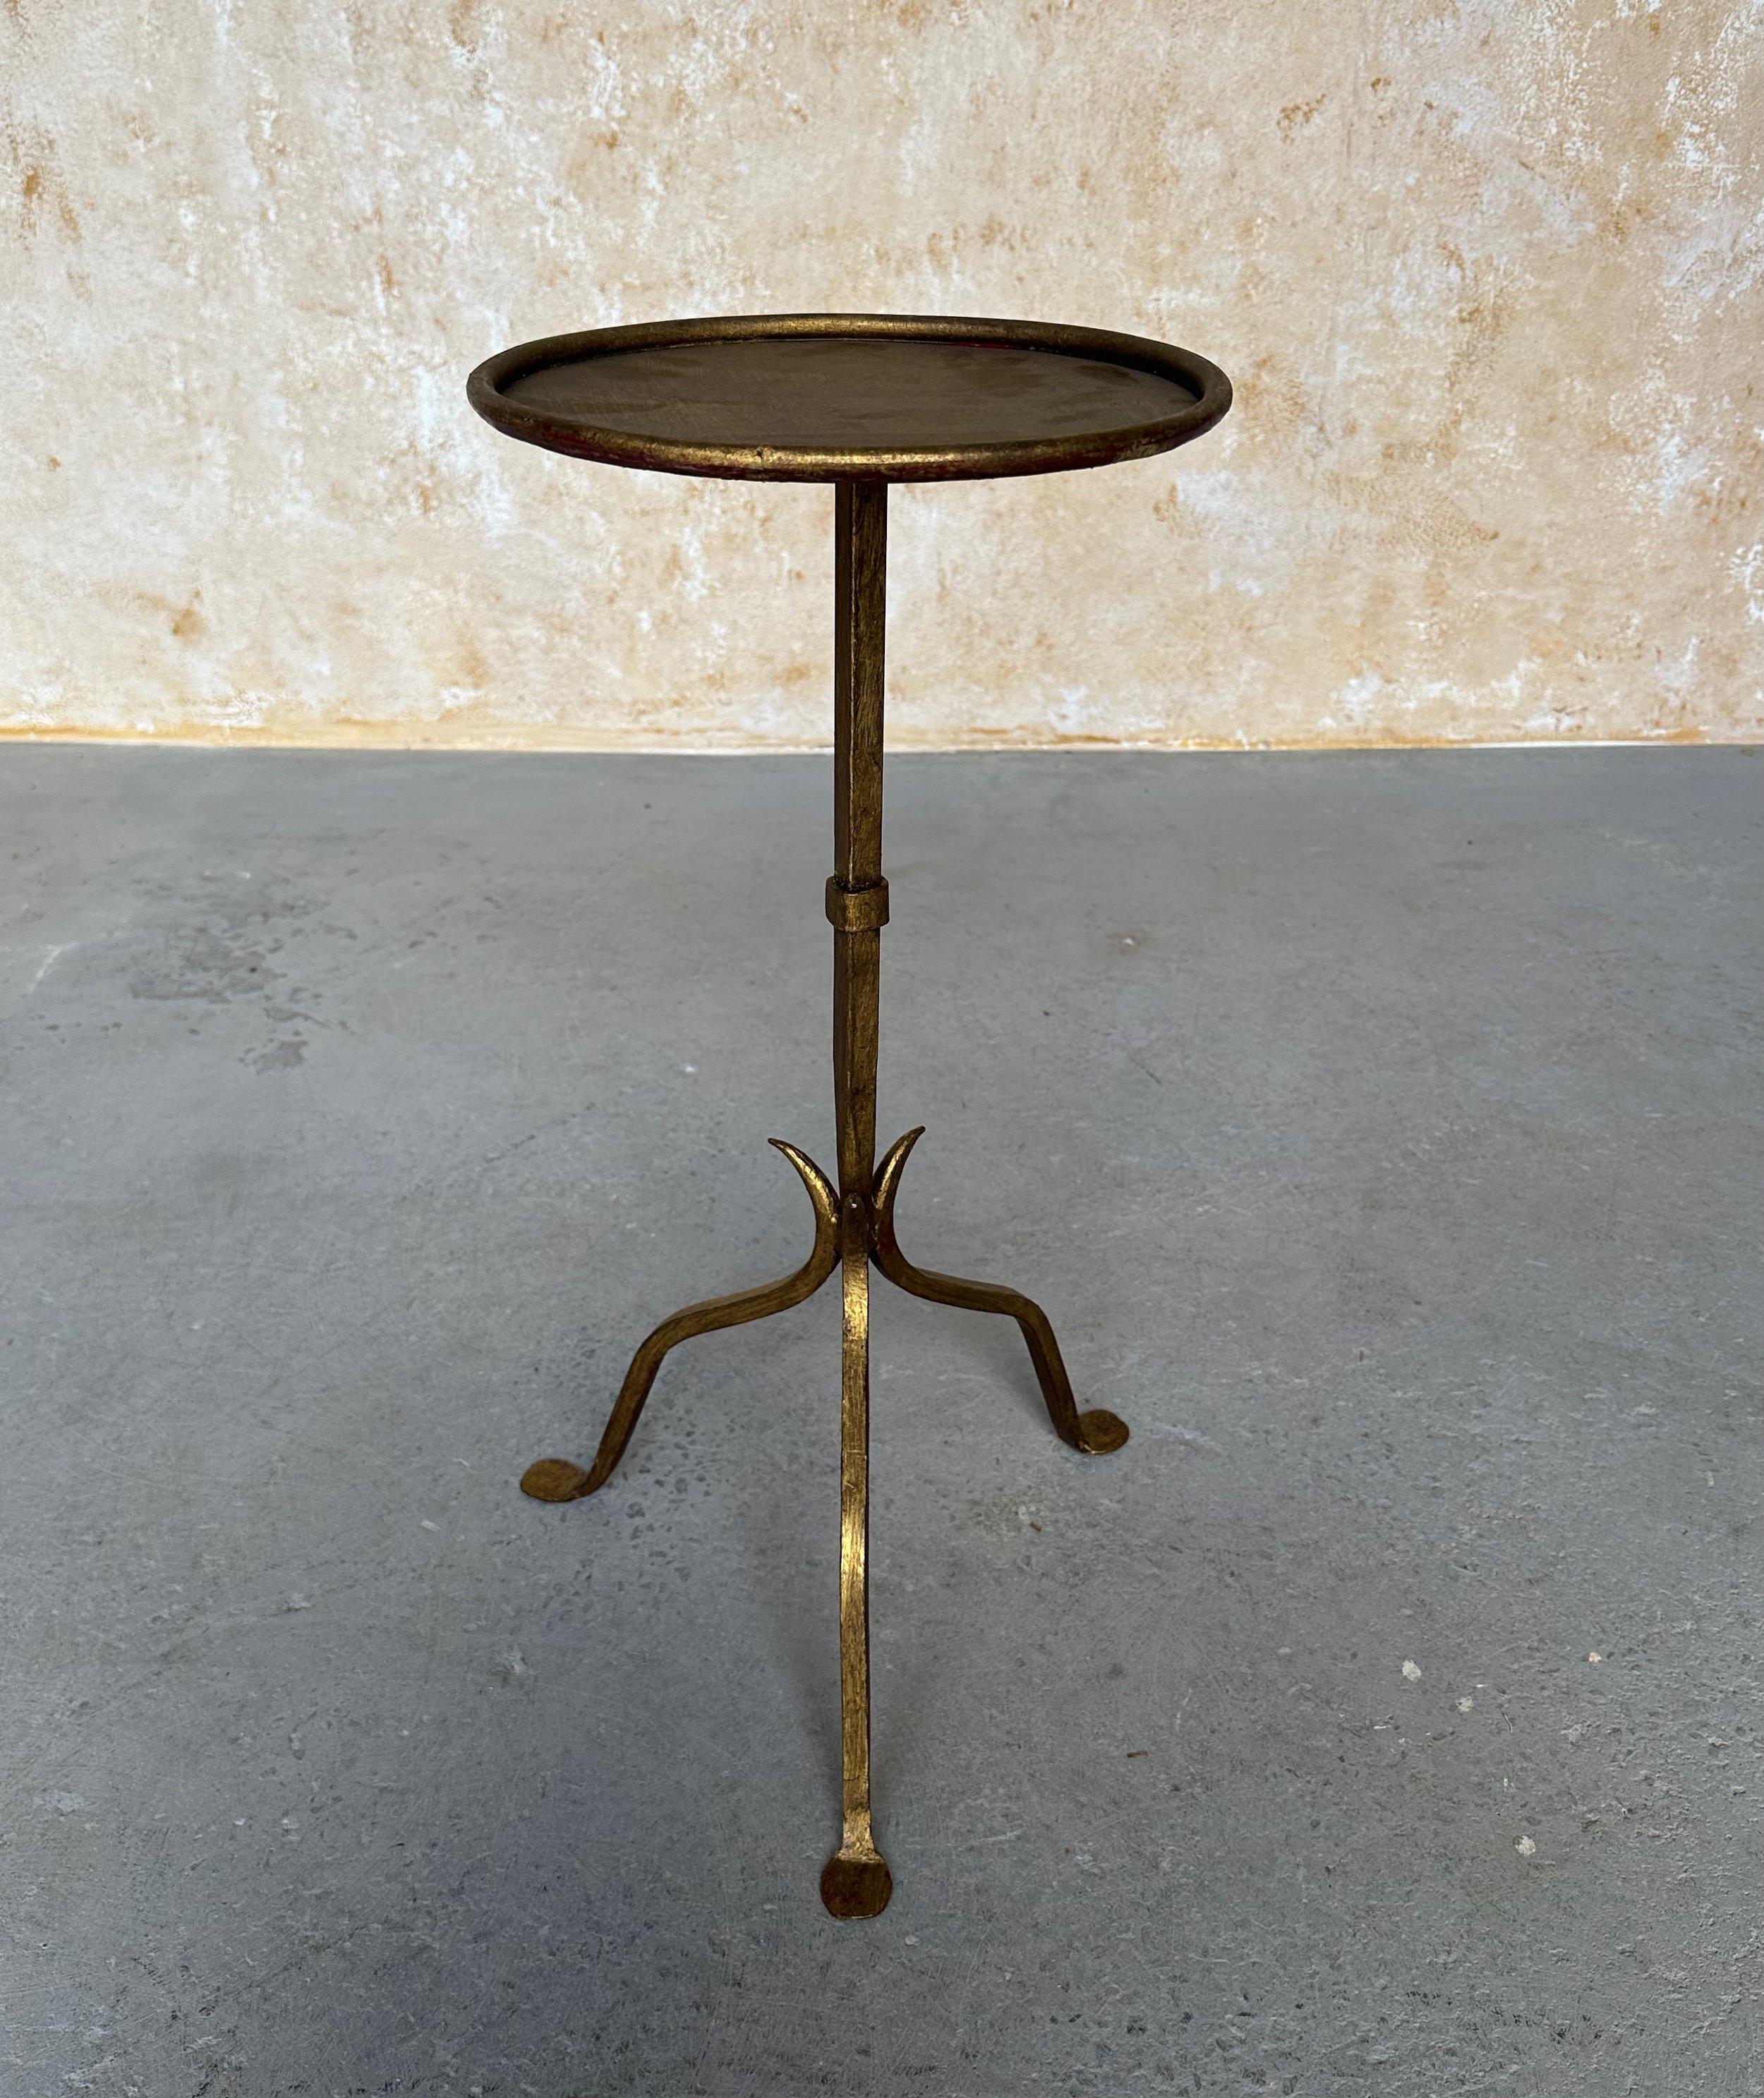 This lovely Spanish iron side table was recently hand crafted by skilled artisans and features a distinctive design with a central stem that tapers to a fine point, attached to a sturdy tripod base that comprises three subtly curved legs. A rolled